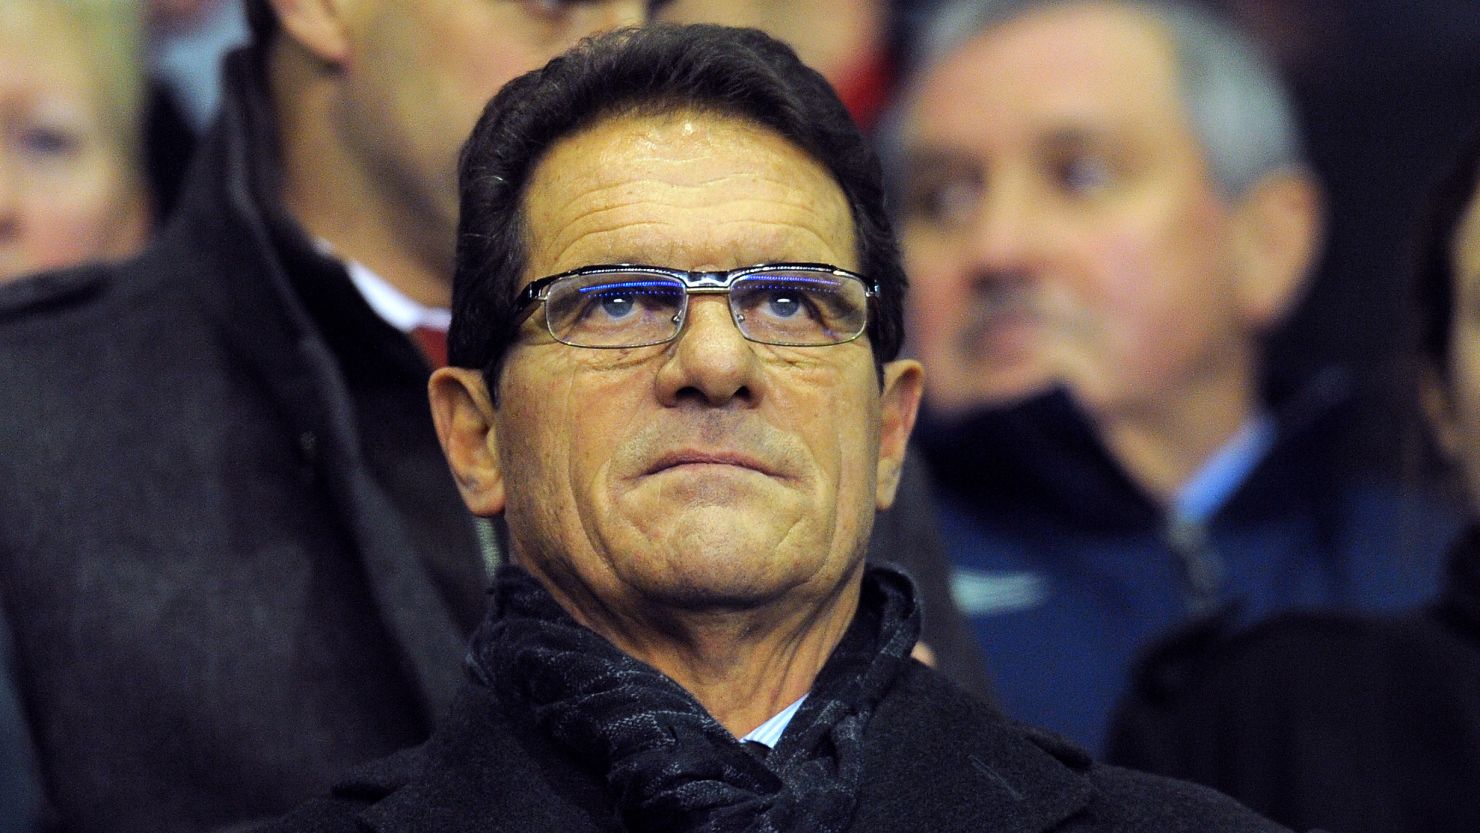 Fabio Capello is the new manager of the Russian national team